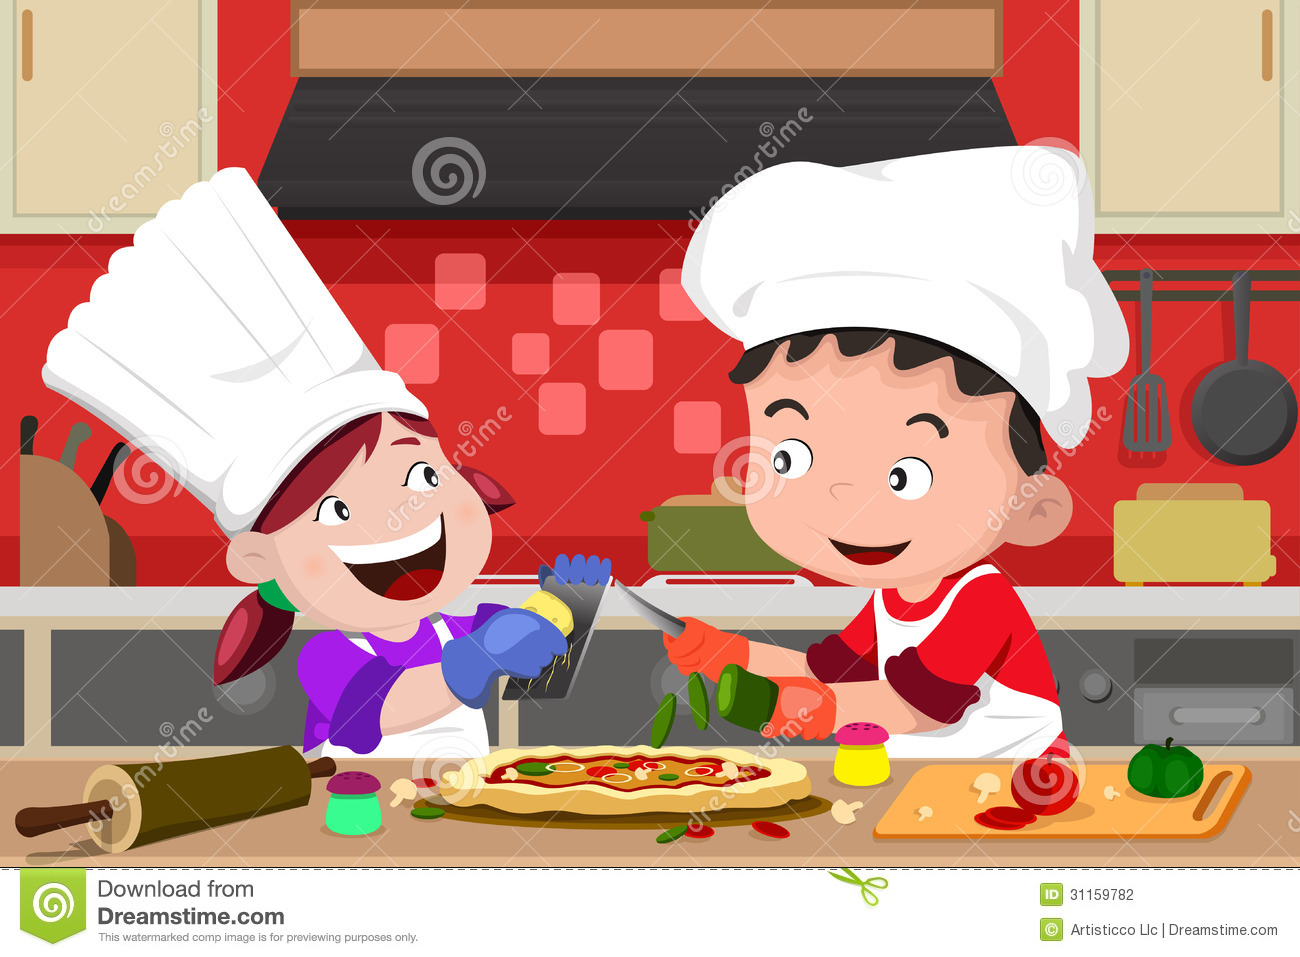 Illustration Of Happy Kids Having Fun In The Kitchen Making Pizza